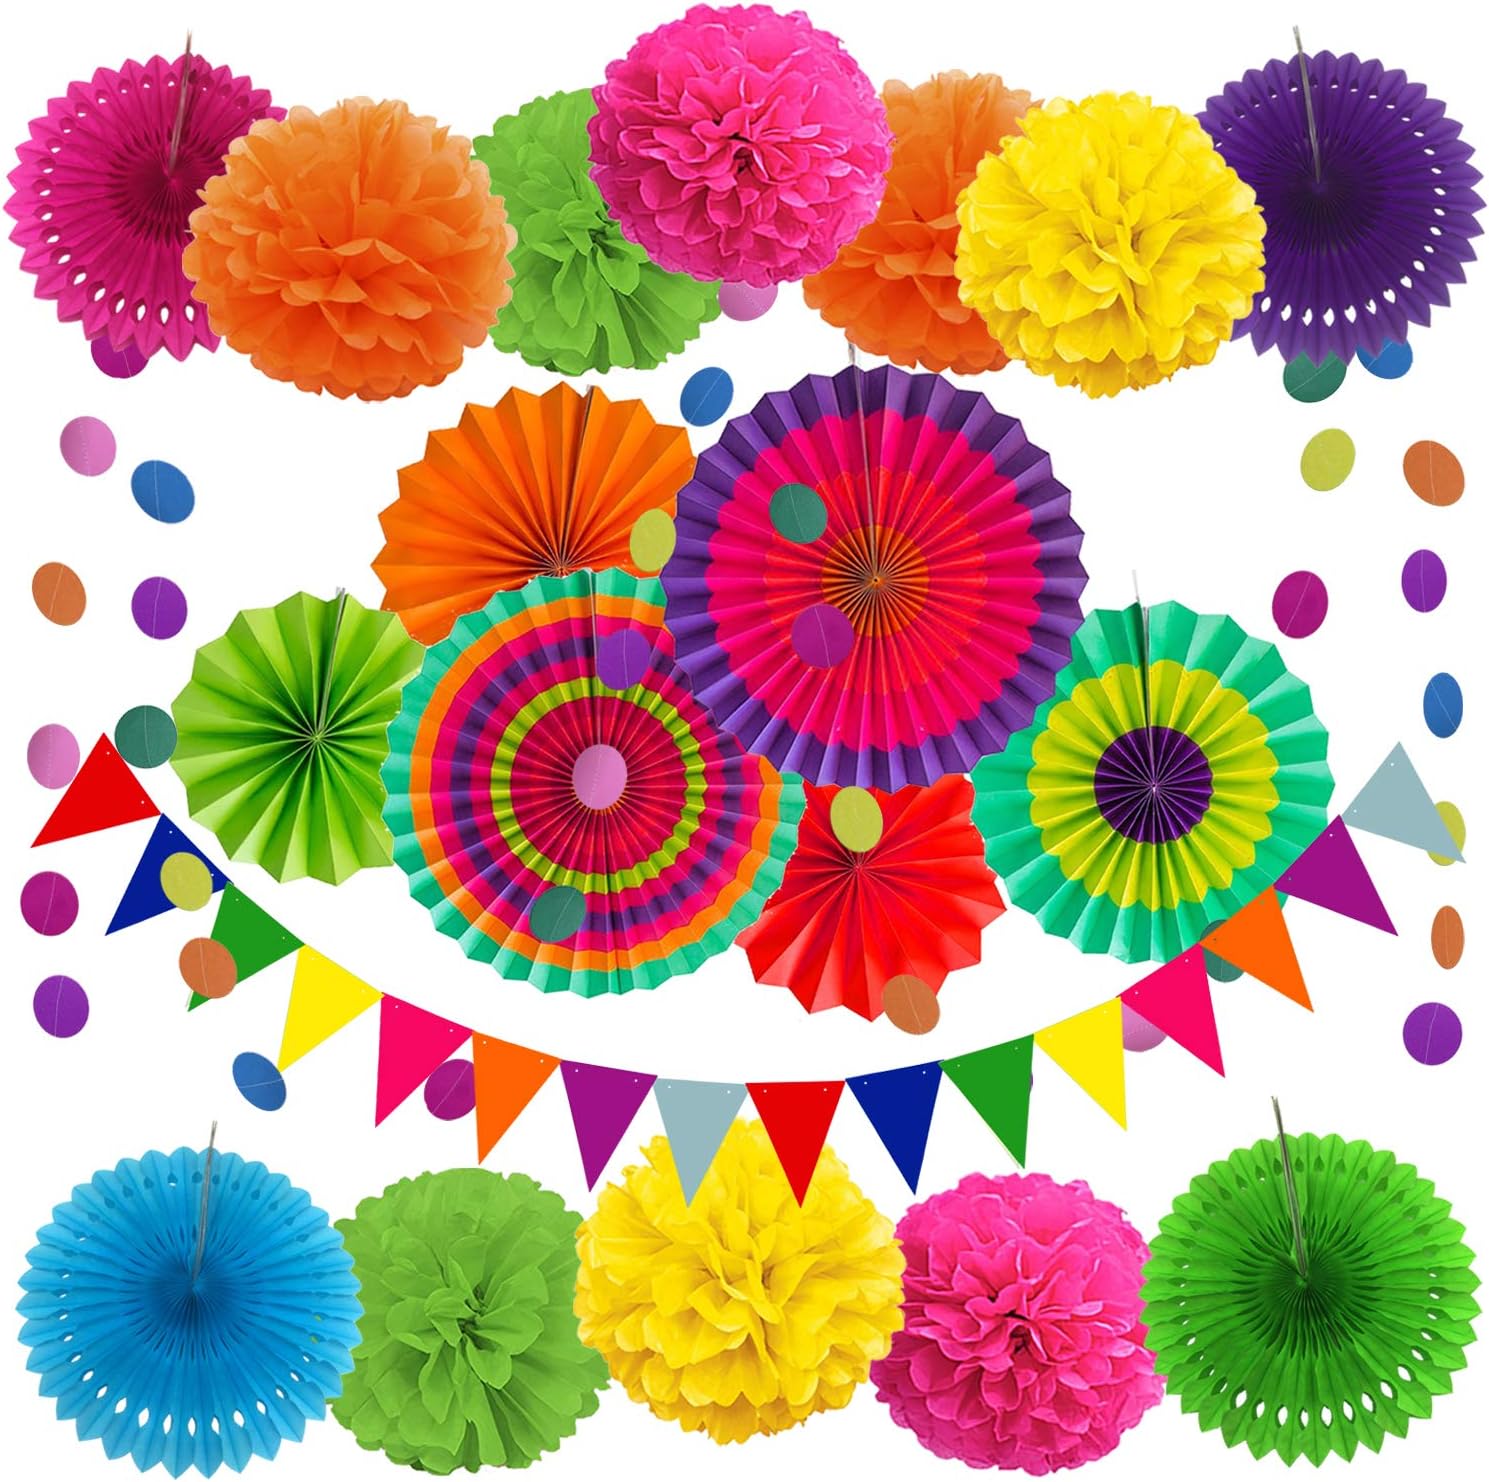 ZERODECO Party Decoration, 21 Pcs Multi-color Hanging Paper Fans, Pom Poms Flowers, Garlands String Polka Dot and Triangle Bunting Flags for Birthday Parties, Wedding Dcor, Fiesta or Mexican Party